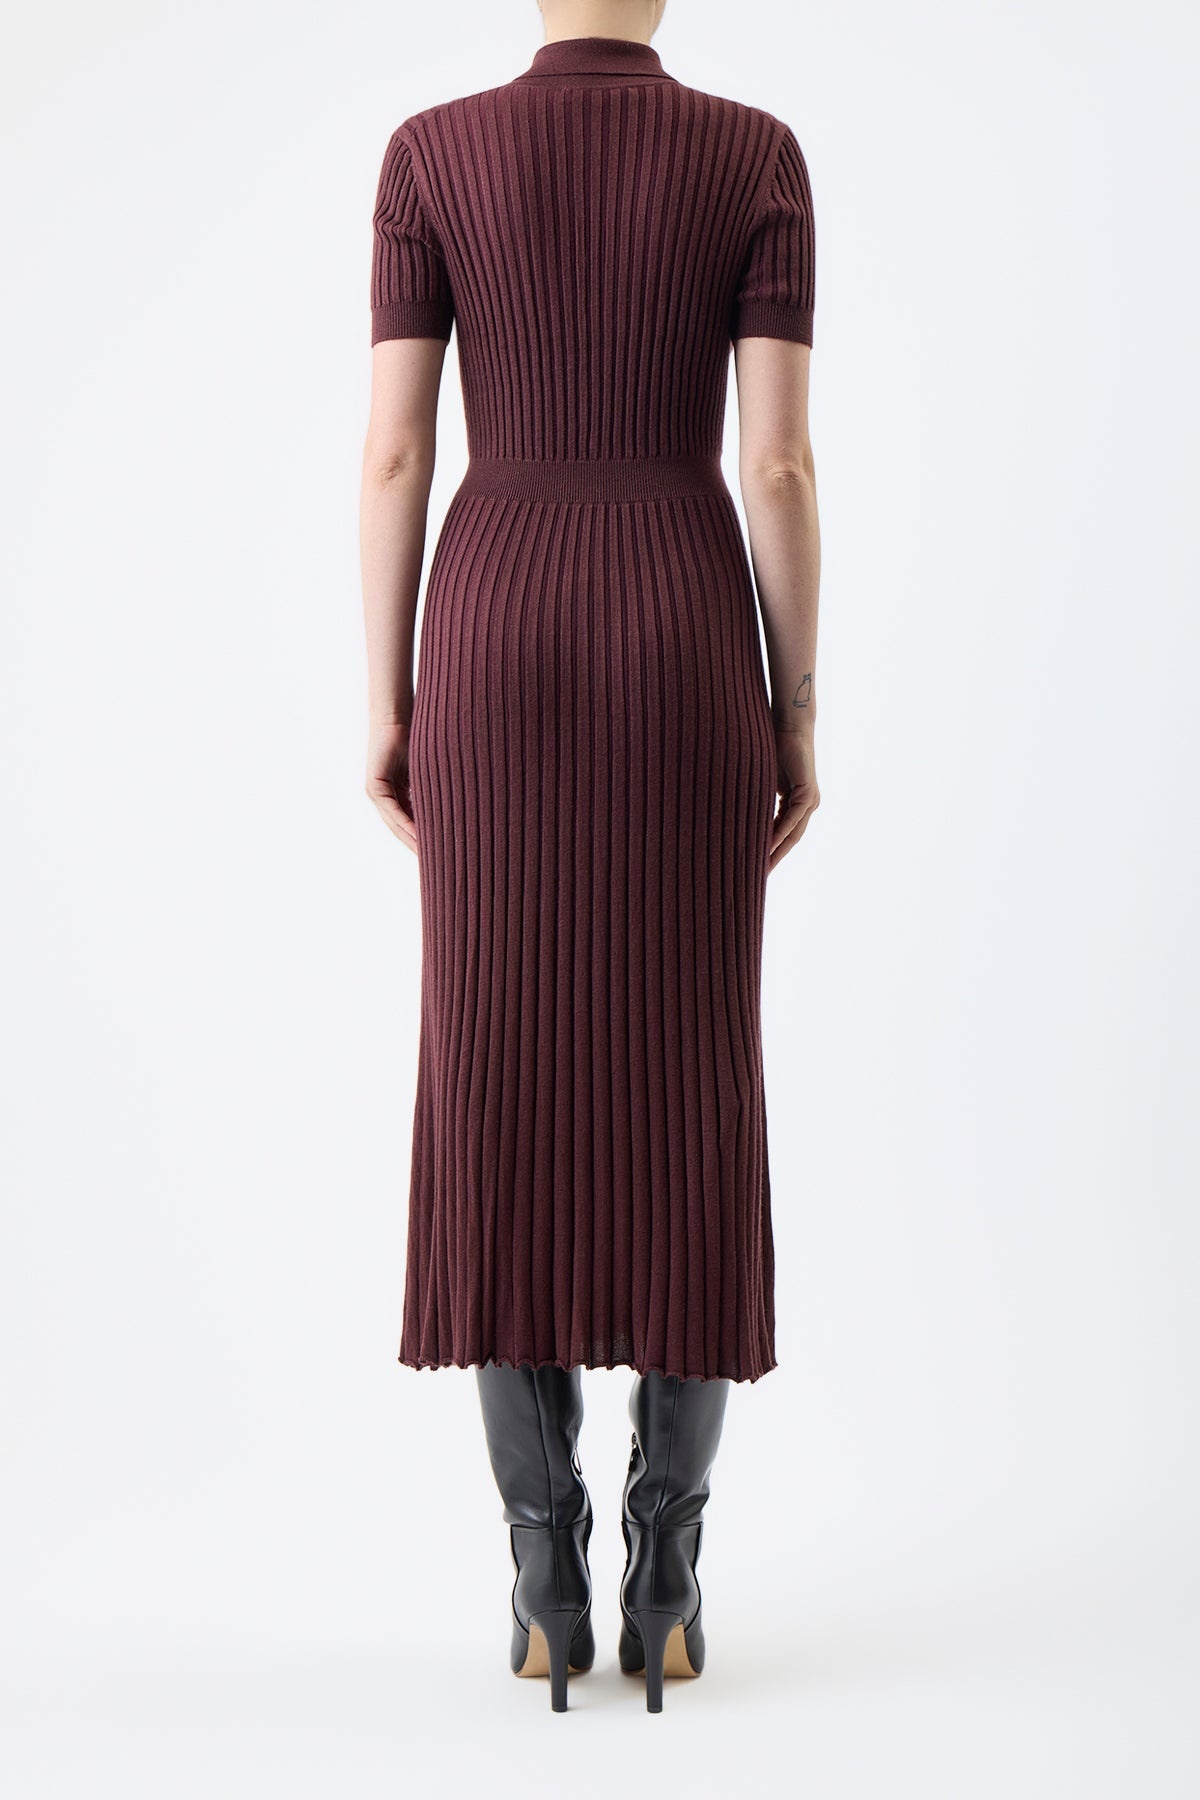 Amor Ribbed Dress in Deep Bordeaux Silk Cashmere - 4